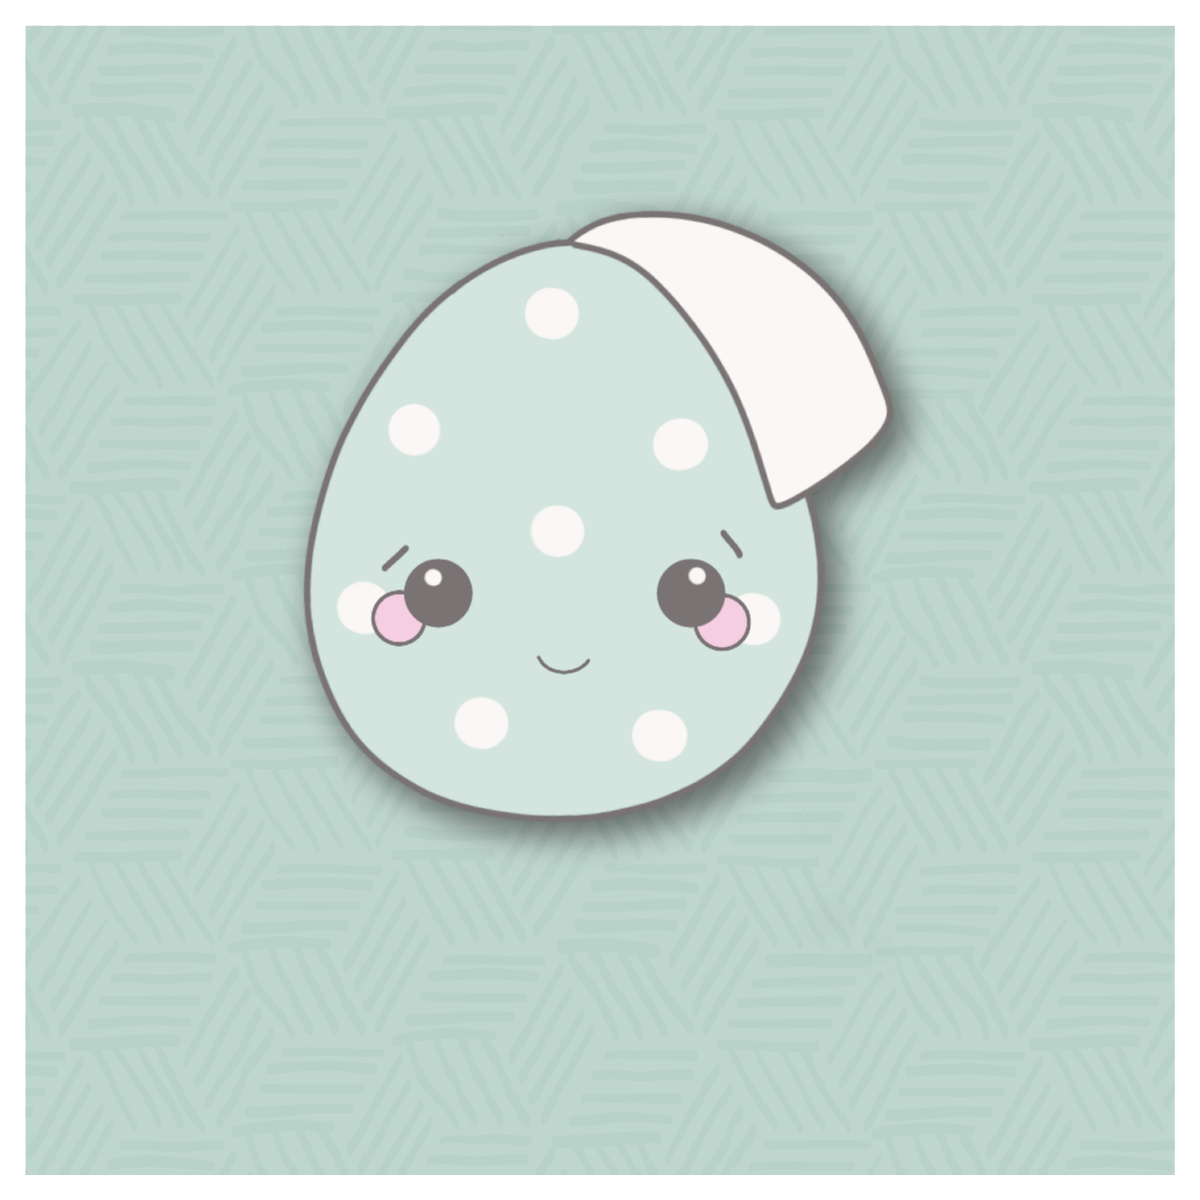 Egg with Tag 2022 Cookie Cutter